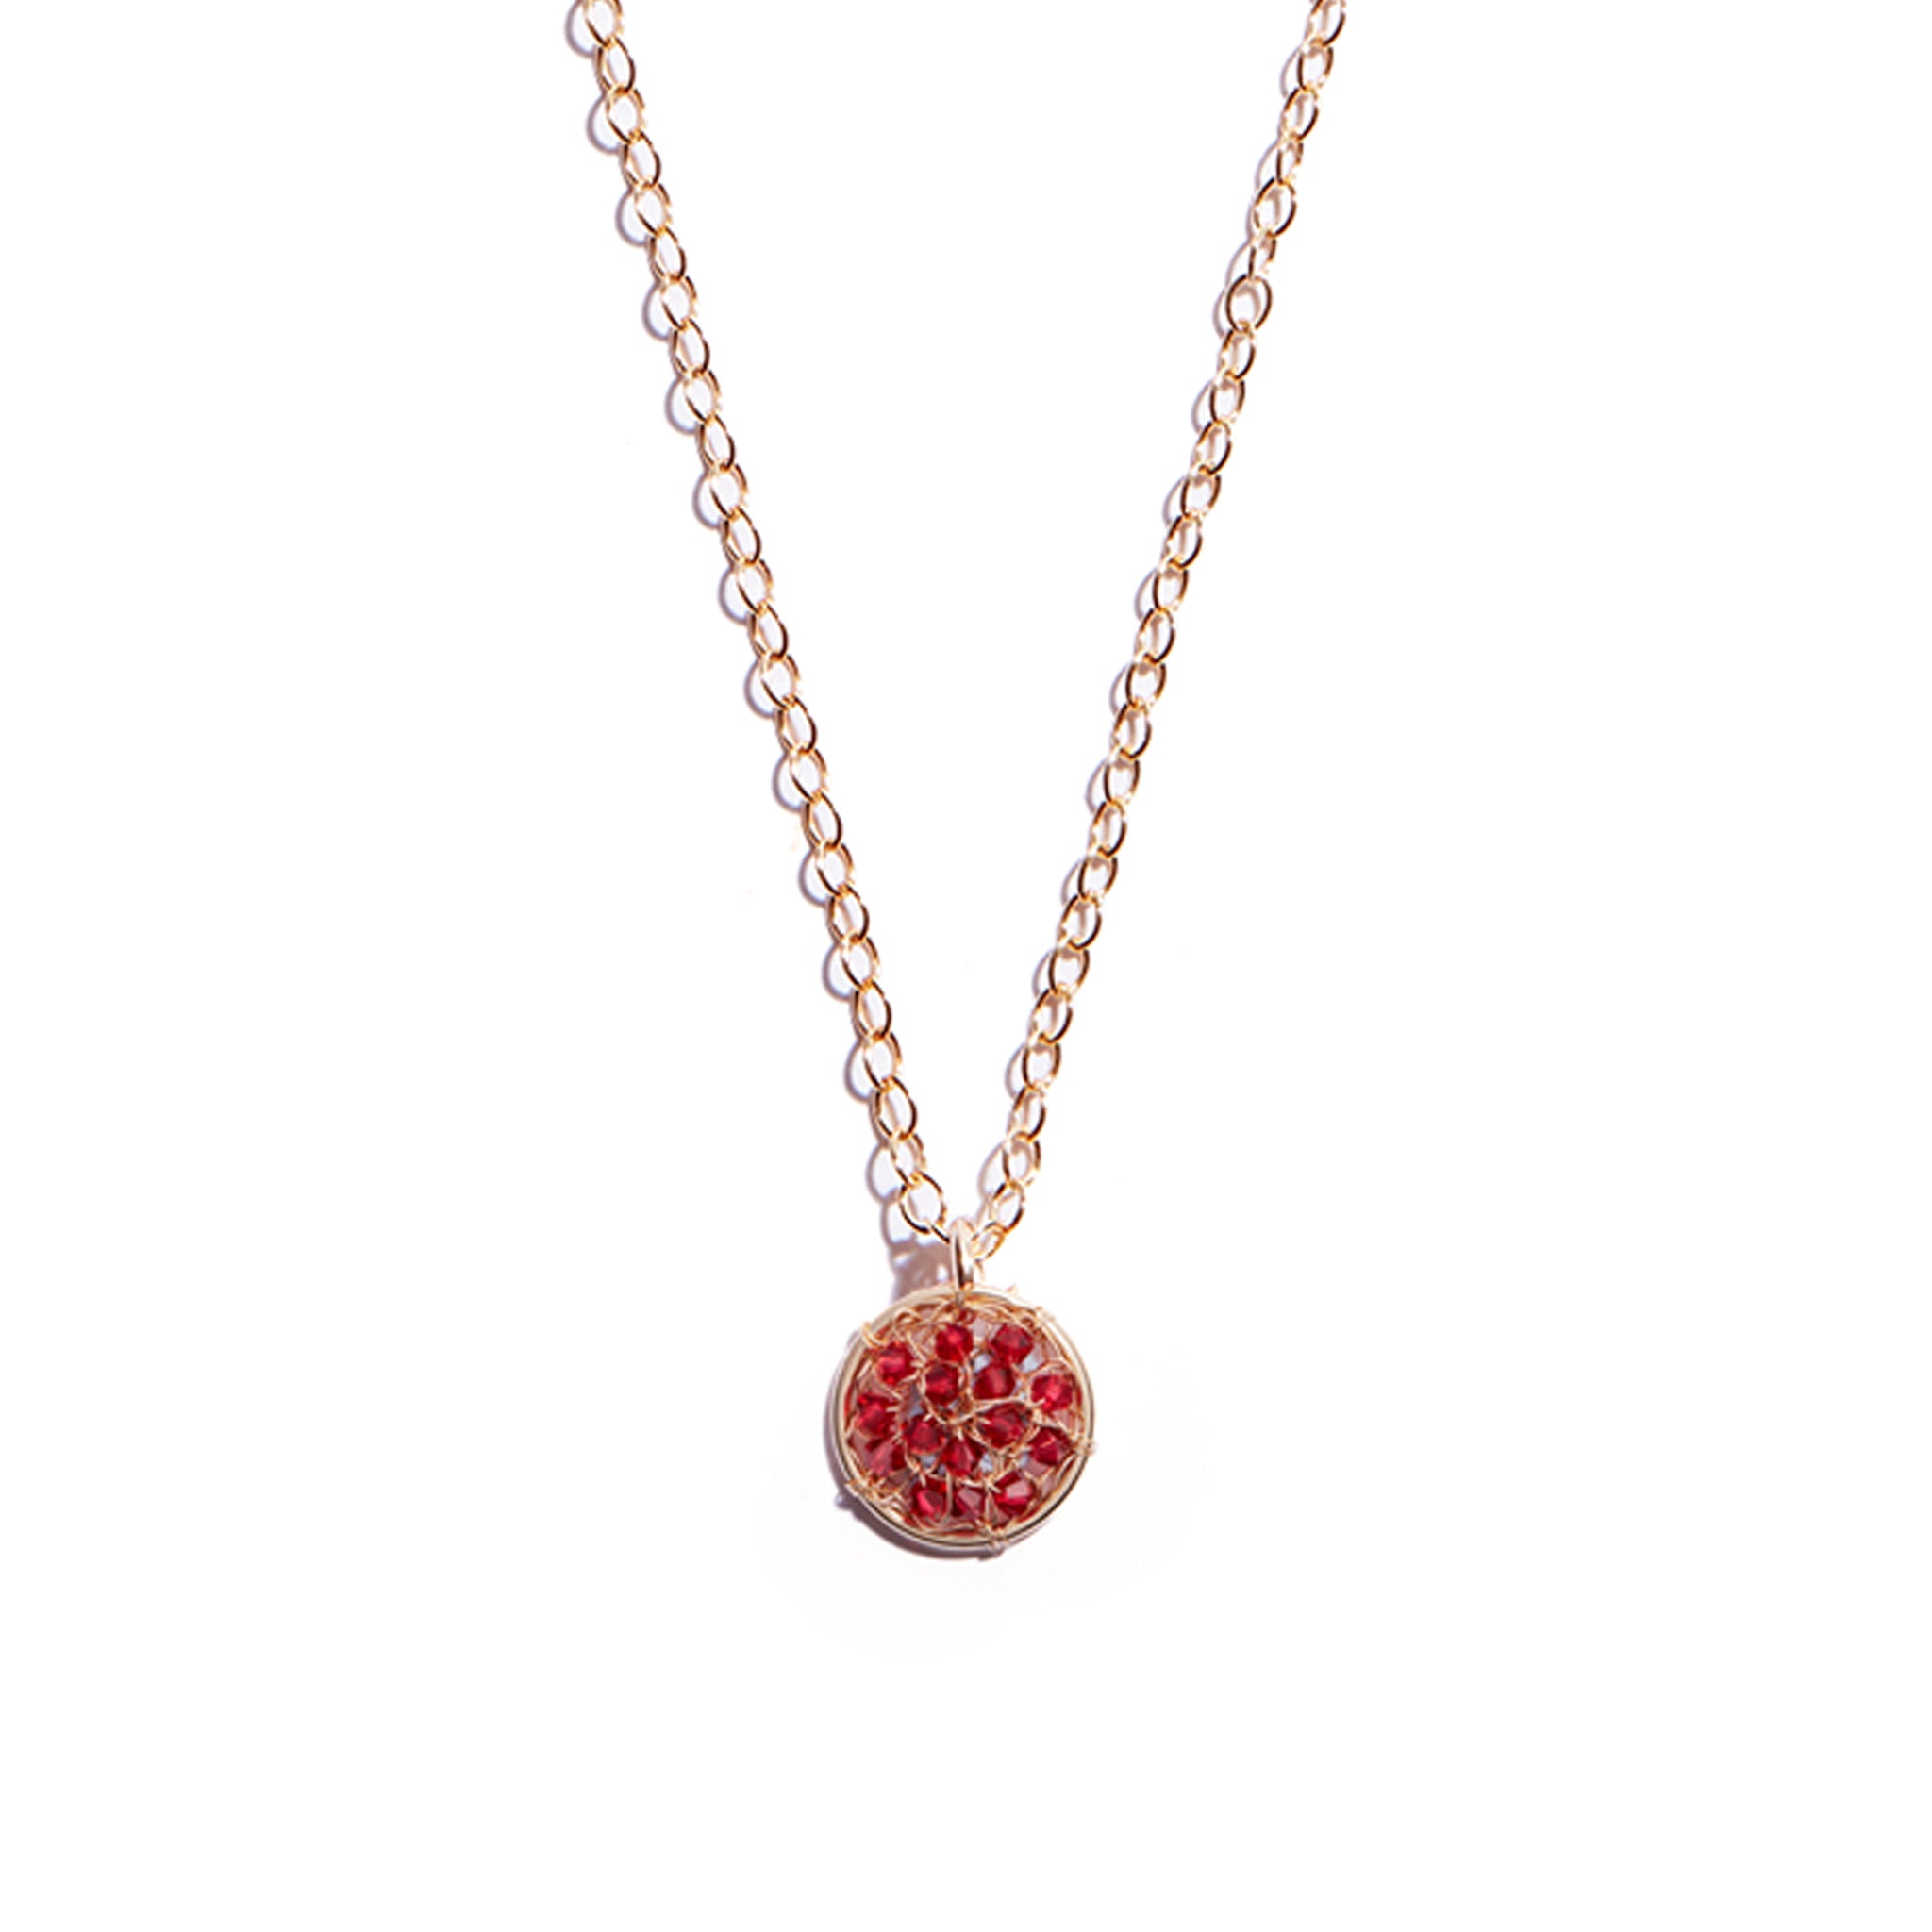 The Fí Ruby Red Pendant showcases our classic Fí design of delicate, woven gold but in this piece we have incorporated vibrant ruby hued gems to add a little something extra. This piece is perfect for adding a dramatic pop of red to your outfit.